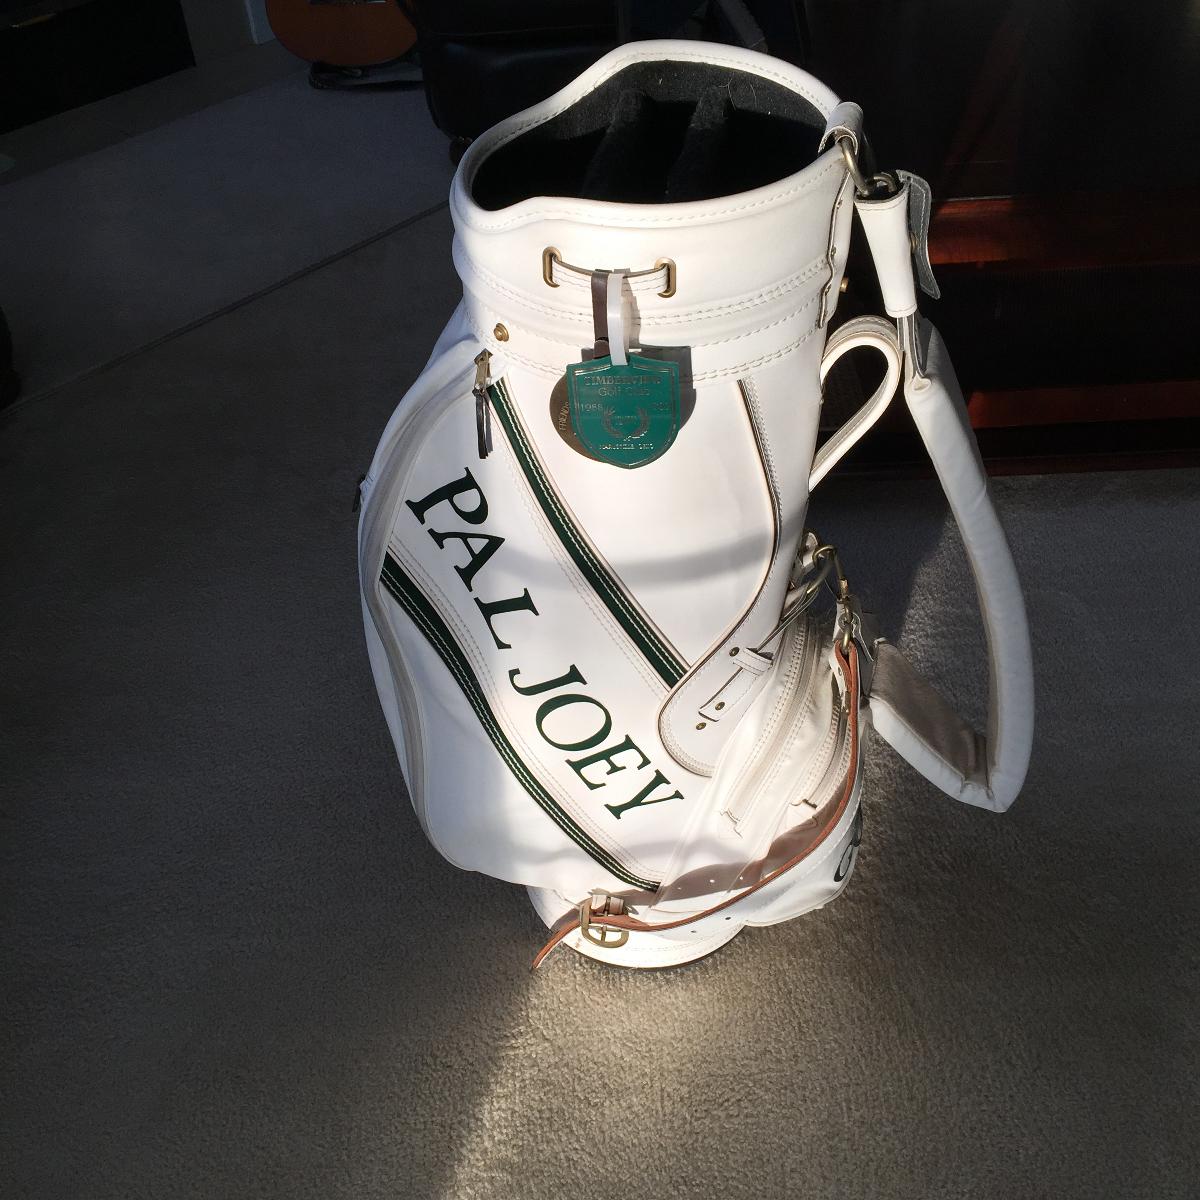 GOLFERS A collectible for your mancave Jimmy Crum's golf bag